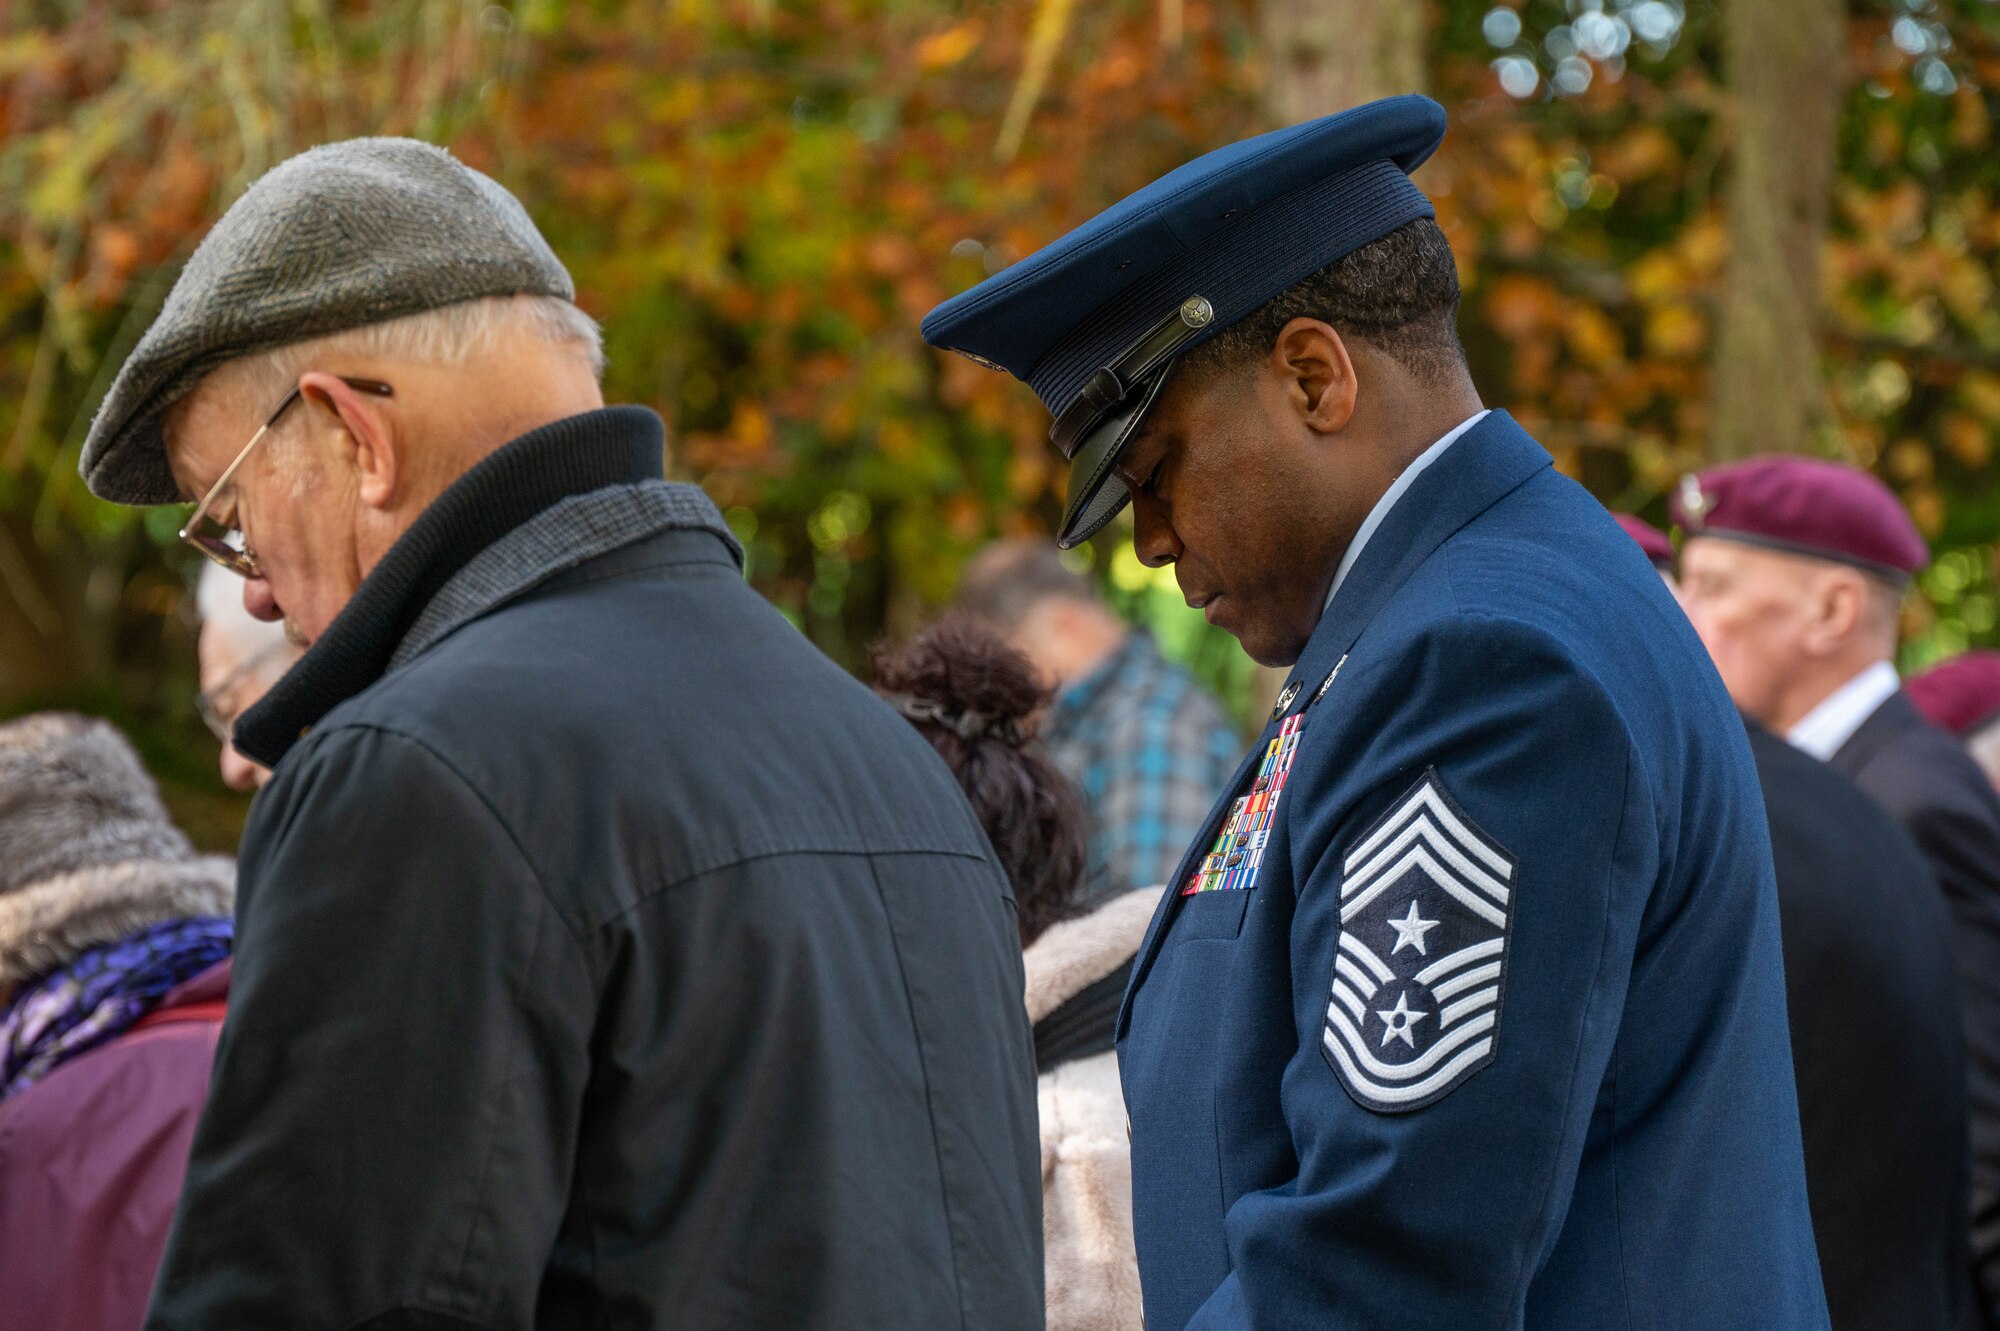 Members bow their heads in prayer during a Remembrance Day ceremony.